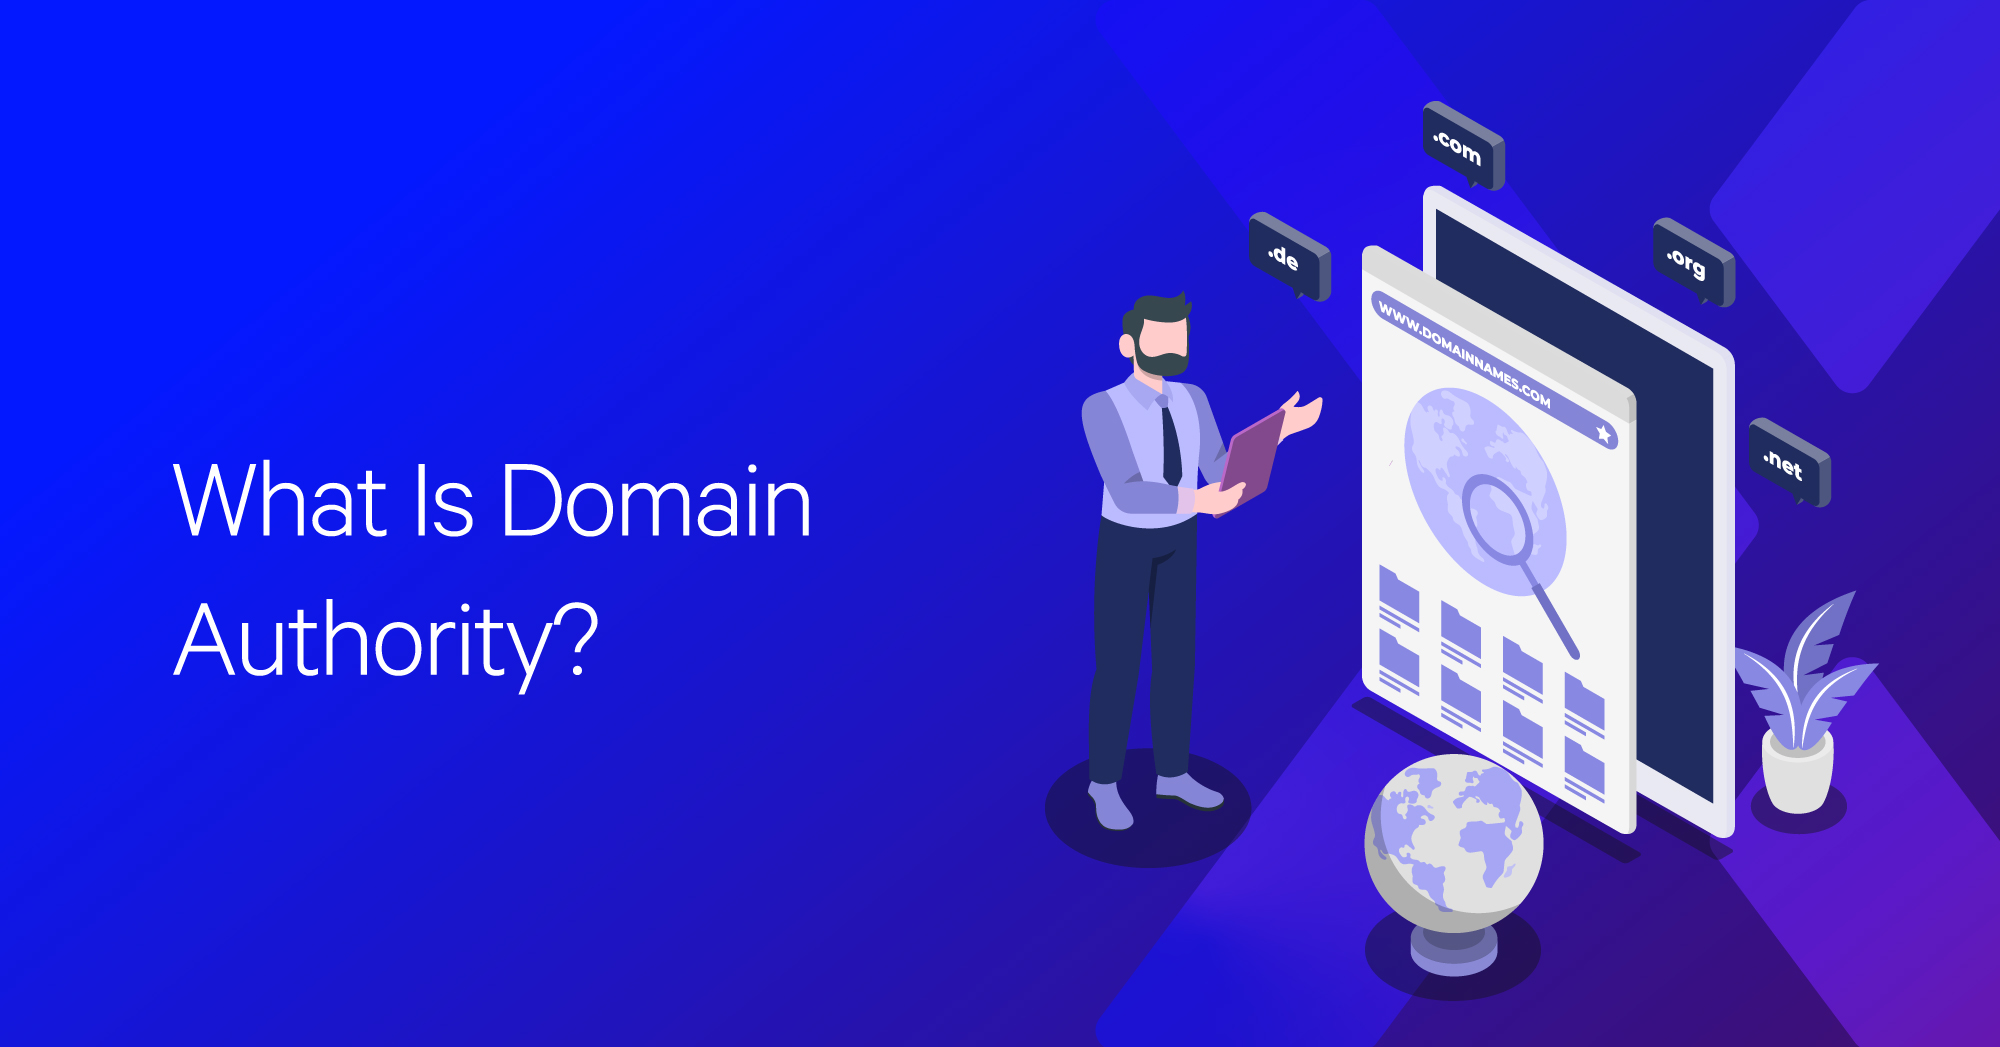 Domain Authority and Linking